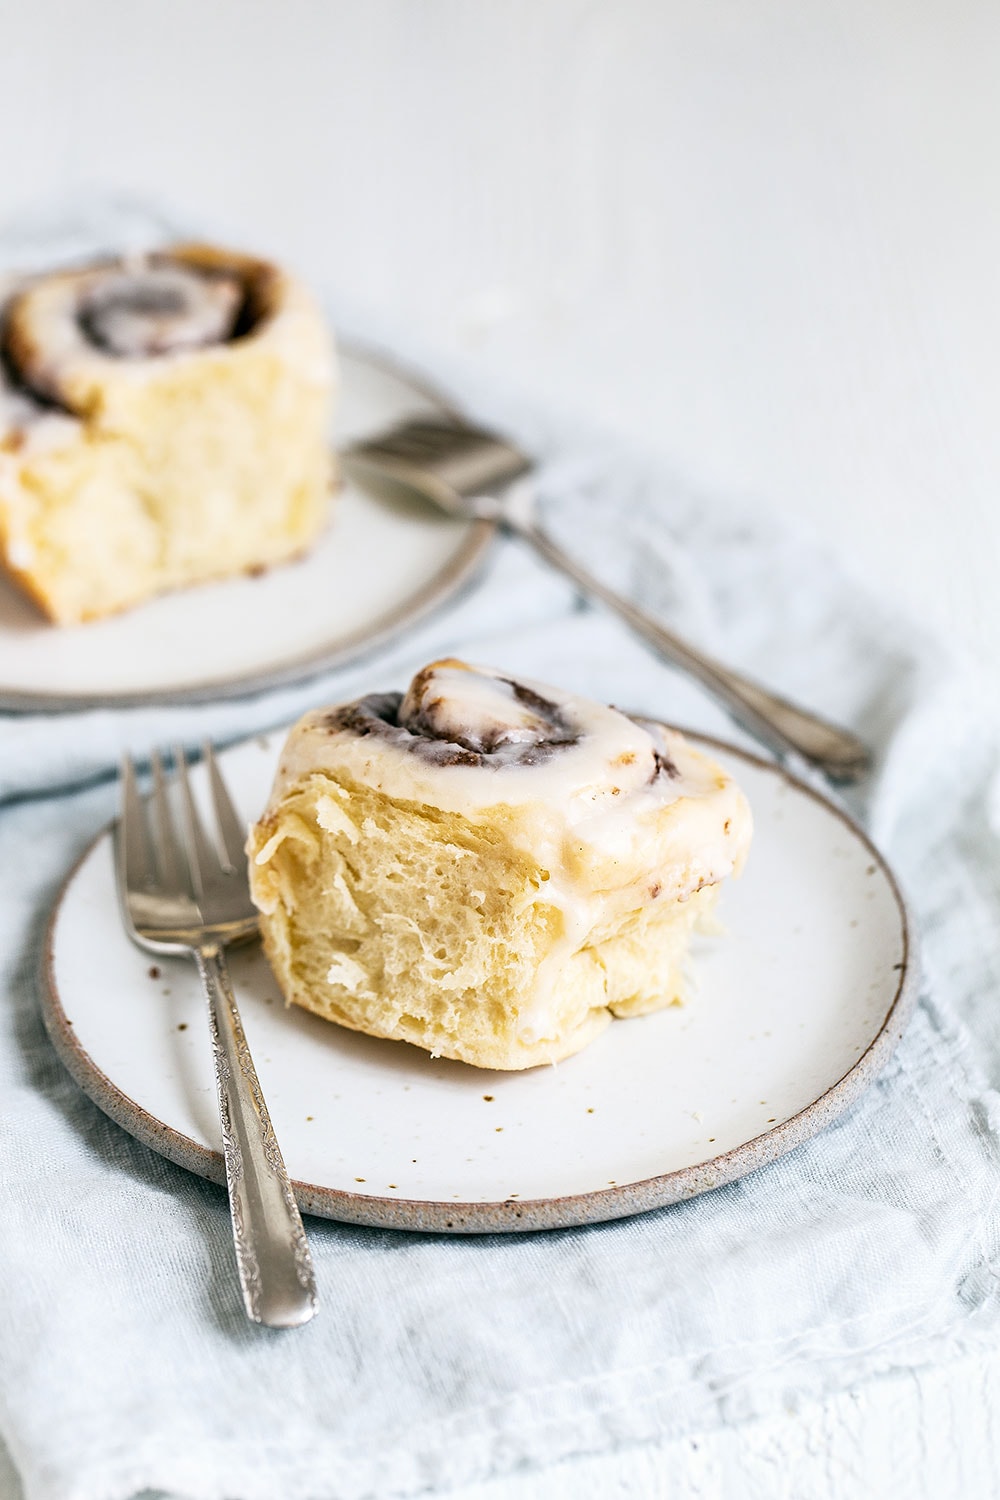 Cinnamon rolls with icing on plates